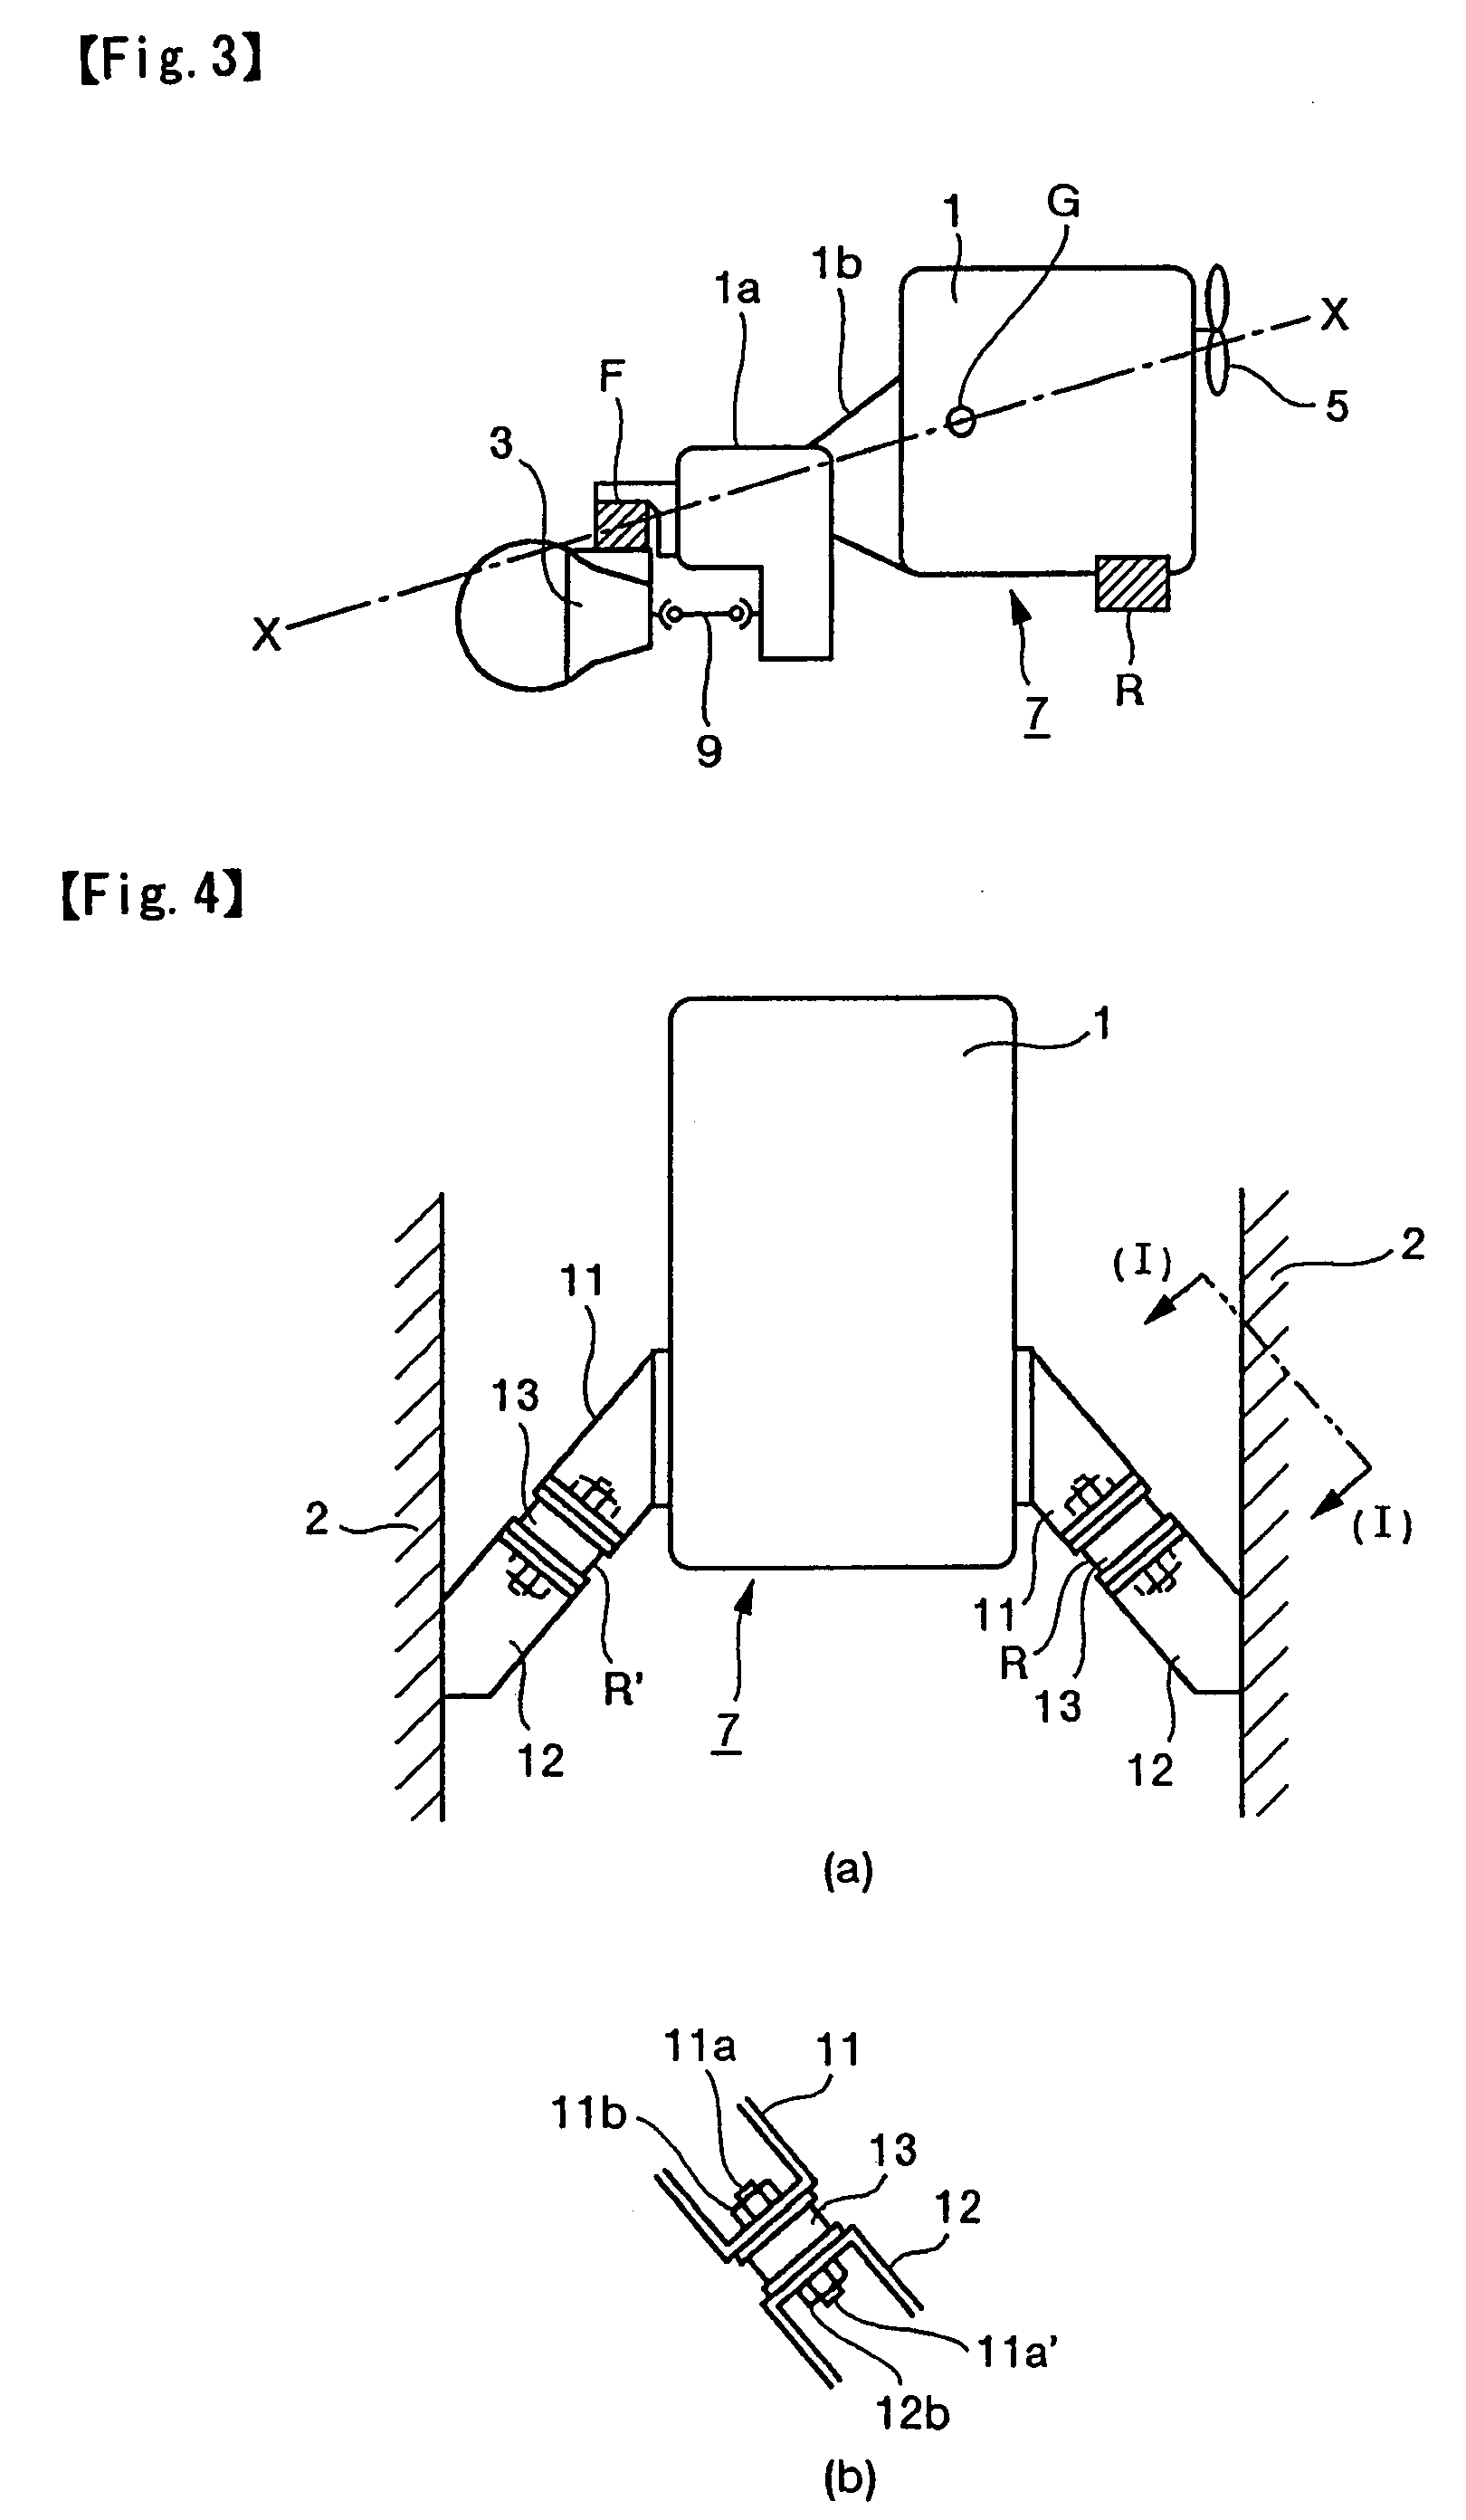 Support system for a forklift power train